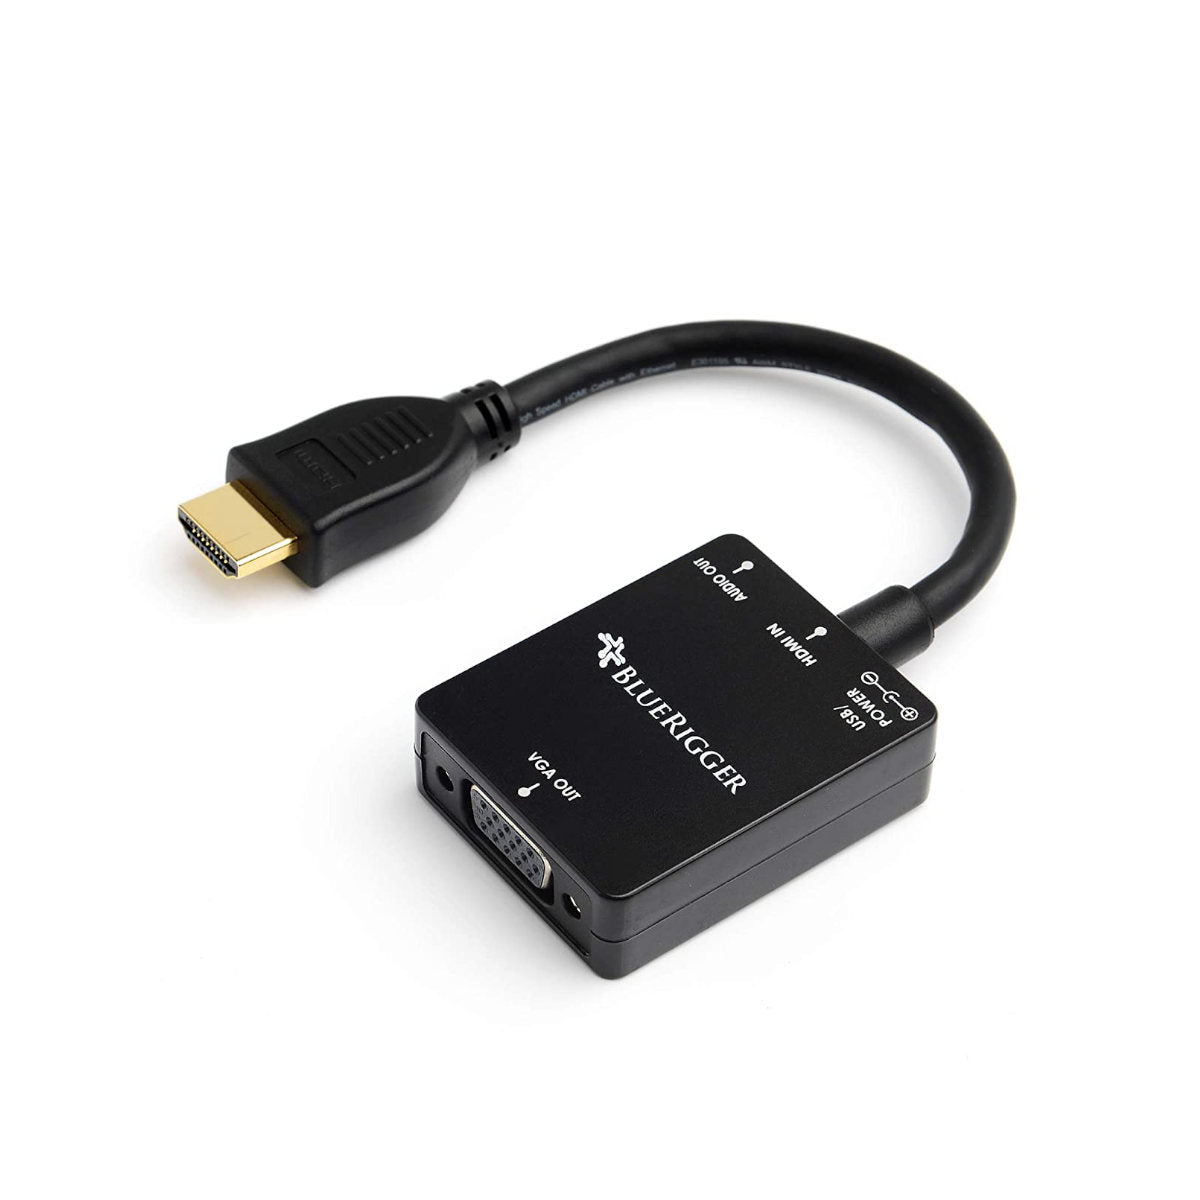 Buy Kinivo Premium 4K HDMI Switch/Splitter HDMI Switcher - Supports 4K @  60Hz, 3D, Full HD and Ultra HD Online at Low Prices in India 